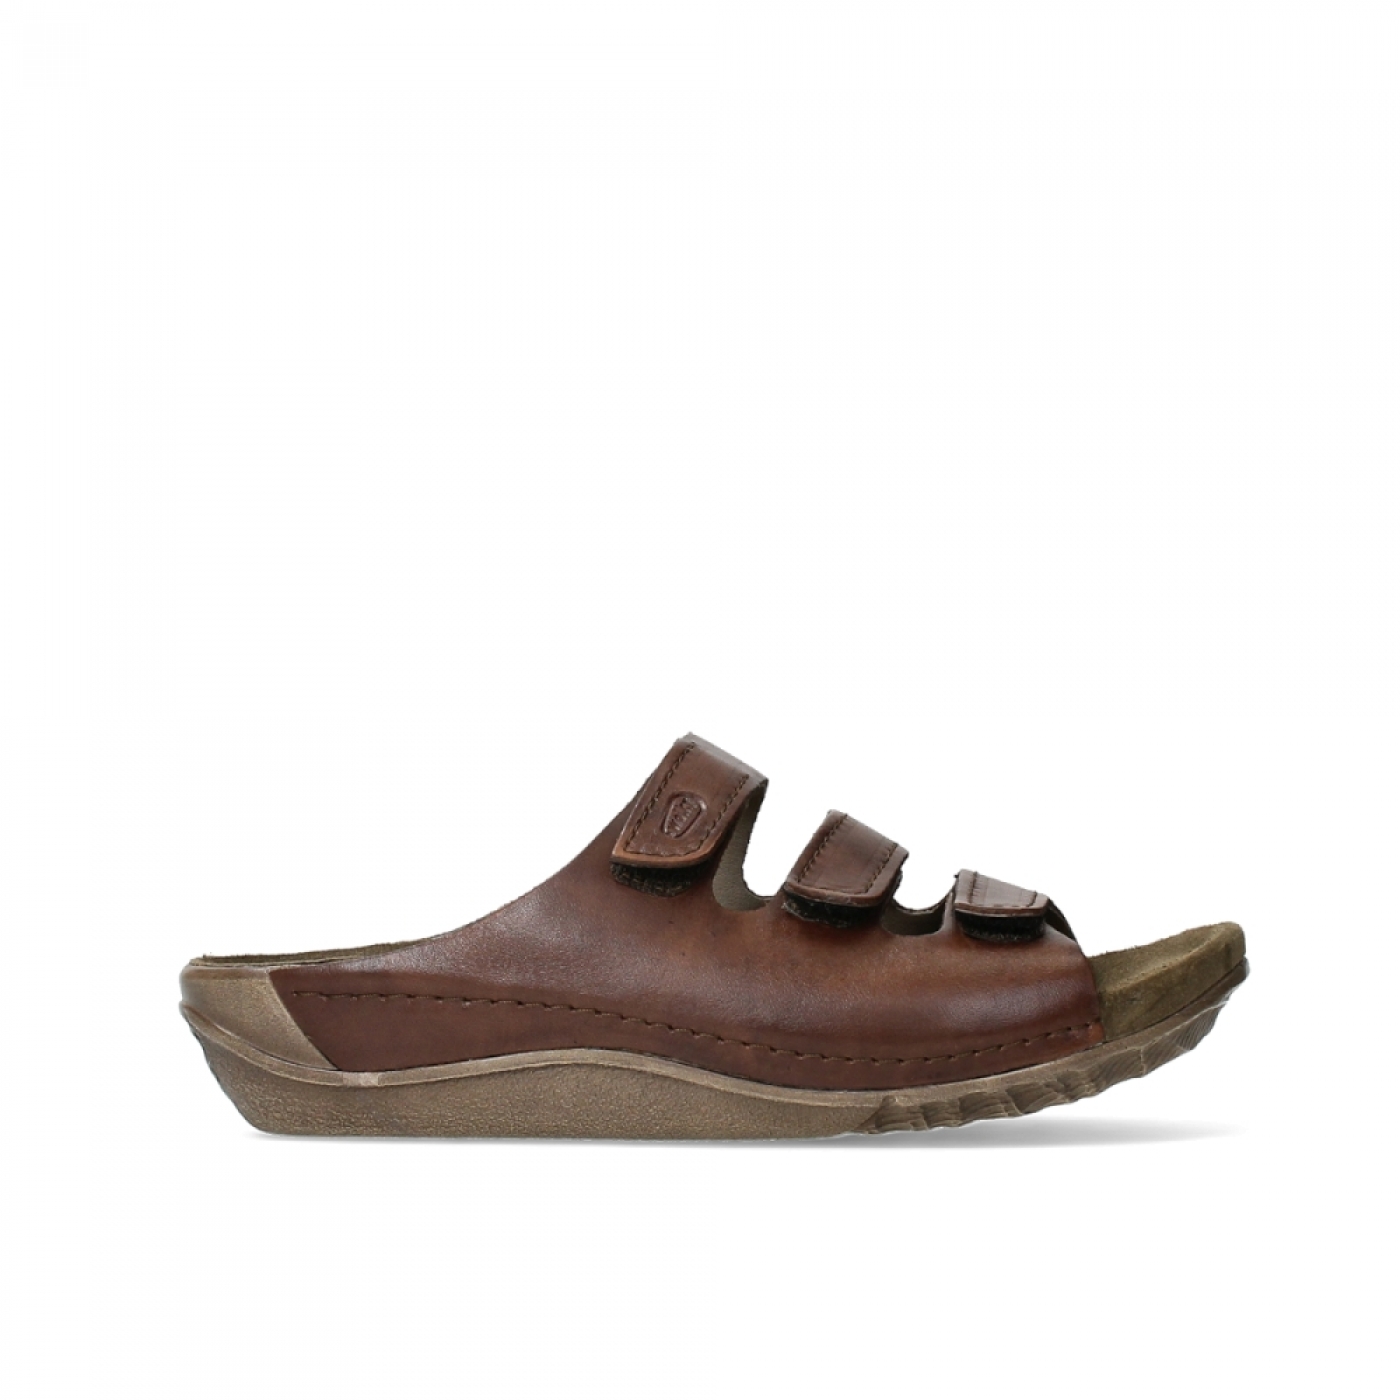 Shoes 00532 Nomad cognac oiled leather order now! Biggest Wolky Collection| Wolkyshop.com